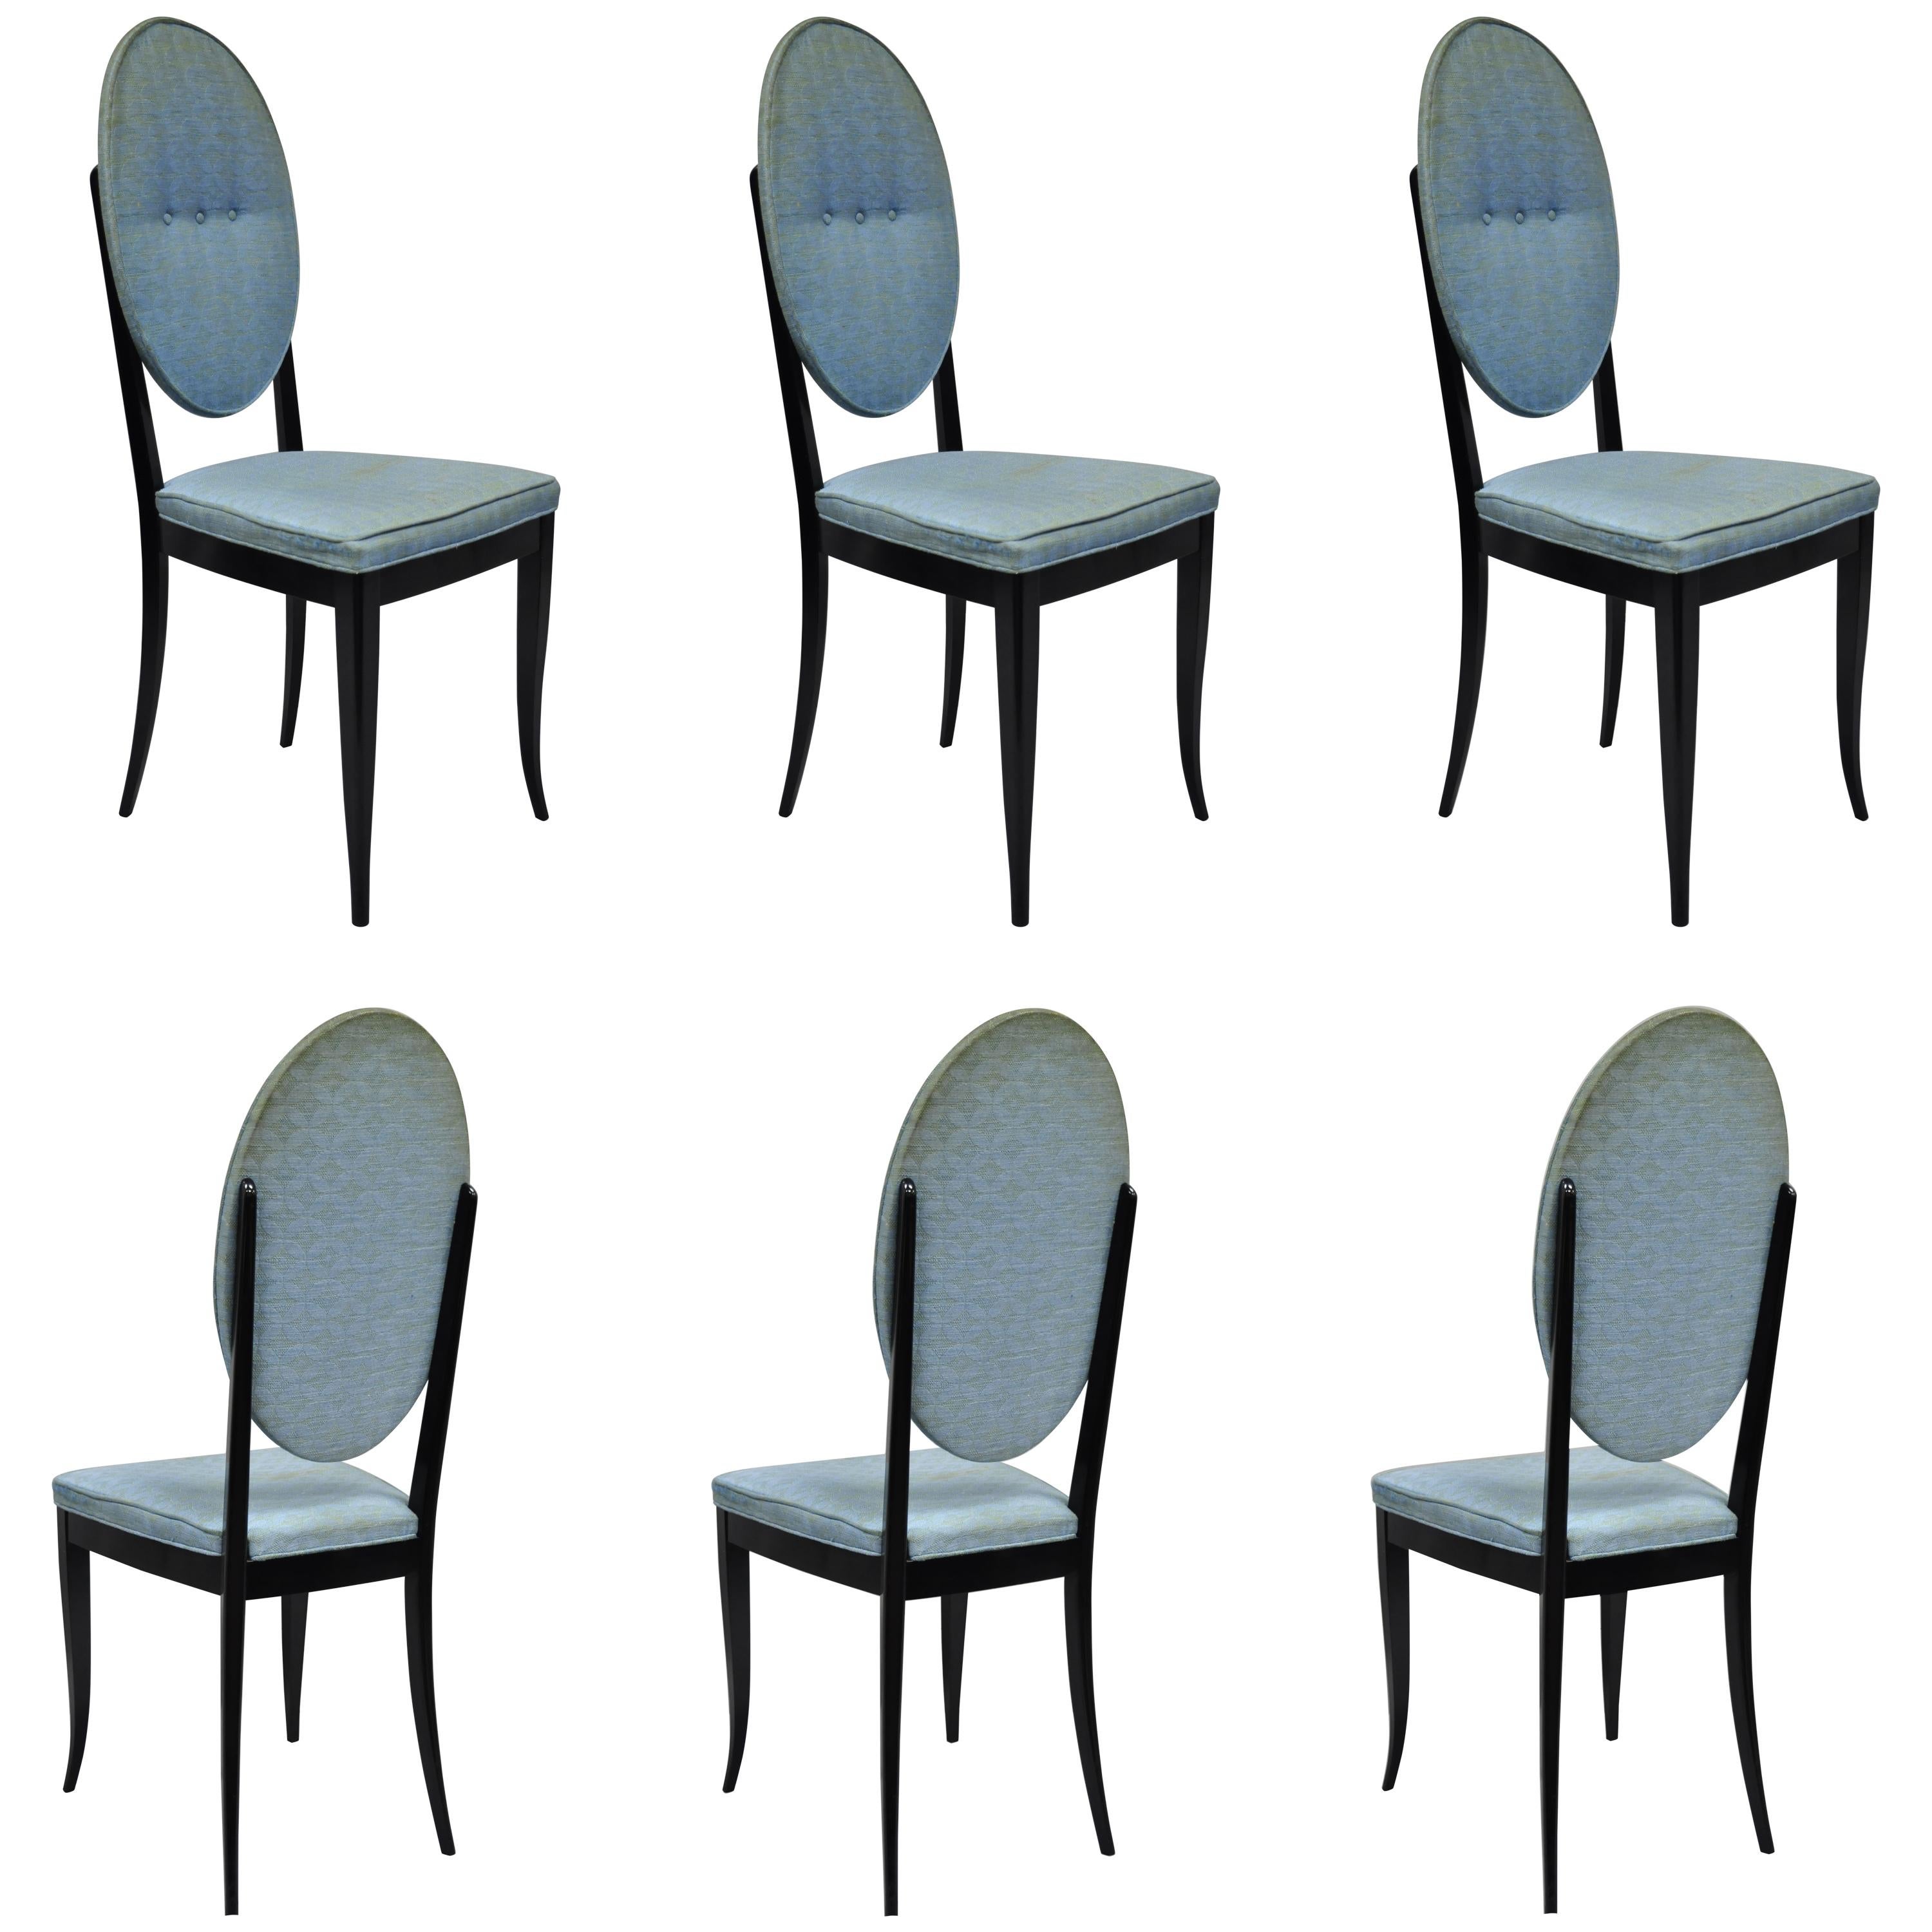 6 Italian Modernist Oval Back Black Lacquer Gio Ponti Style Dining Chairs